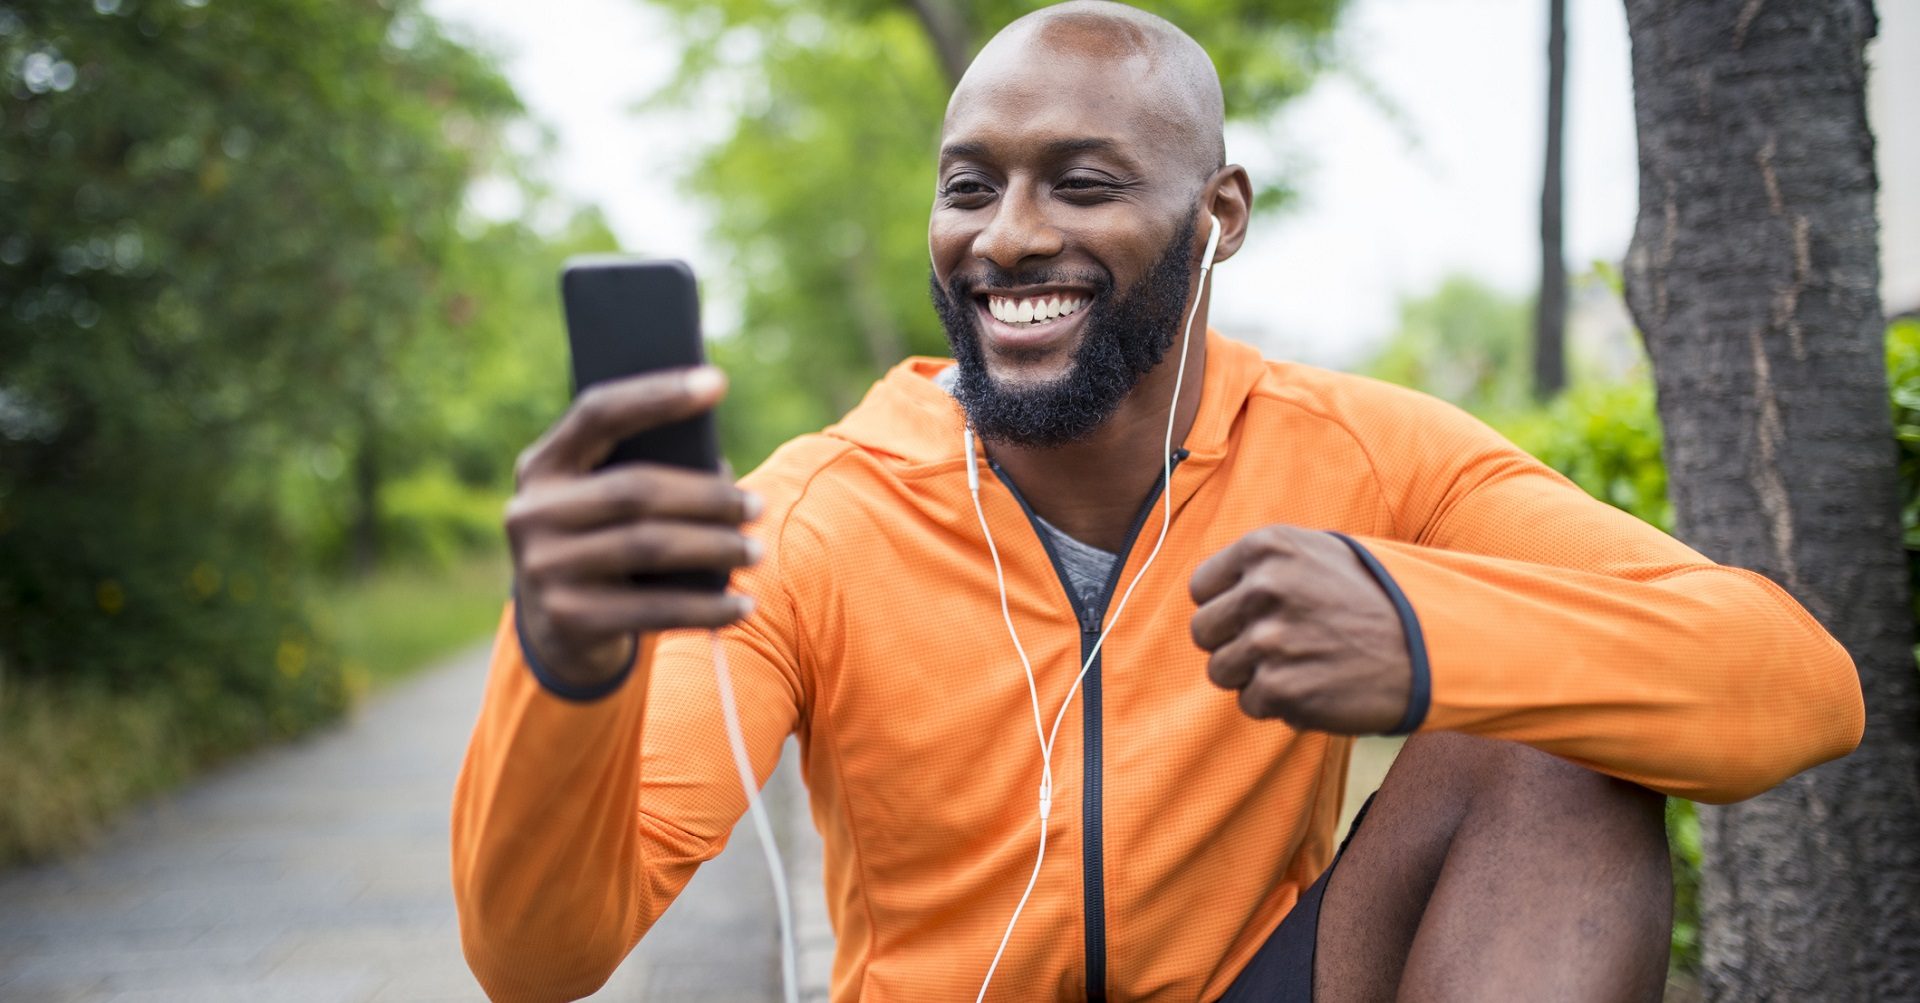 Man sitting on bench in workout clothes on cellphone